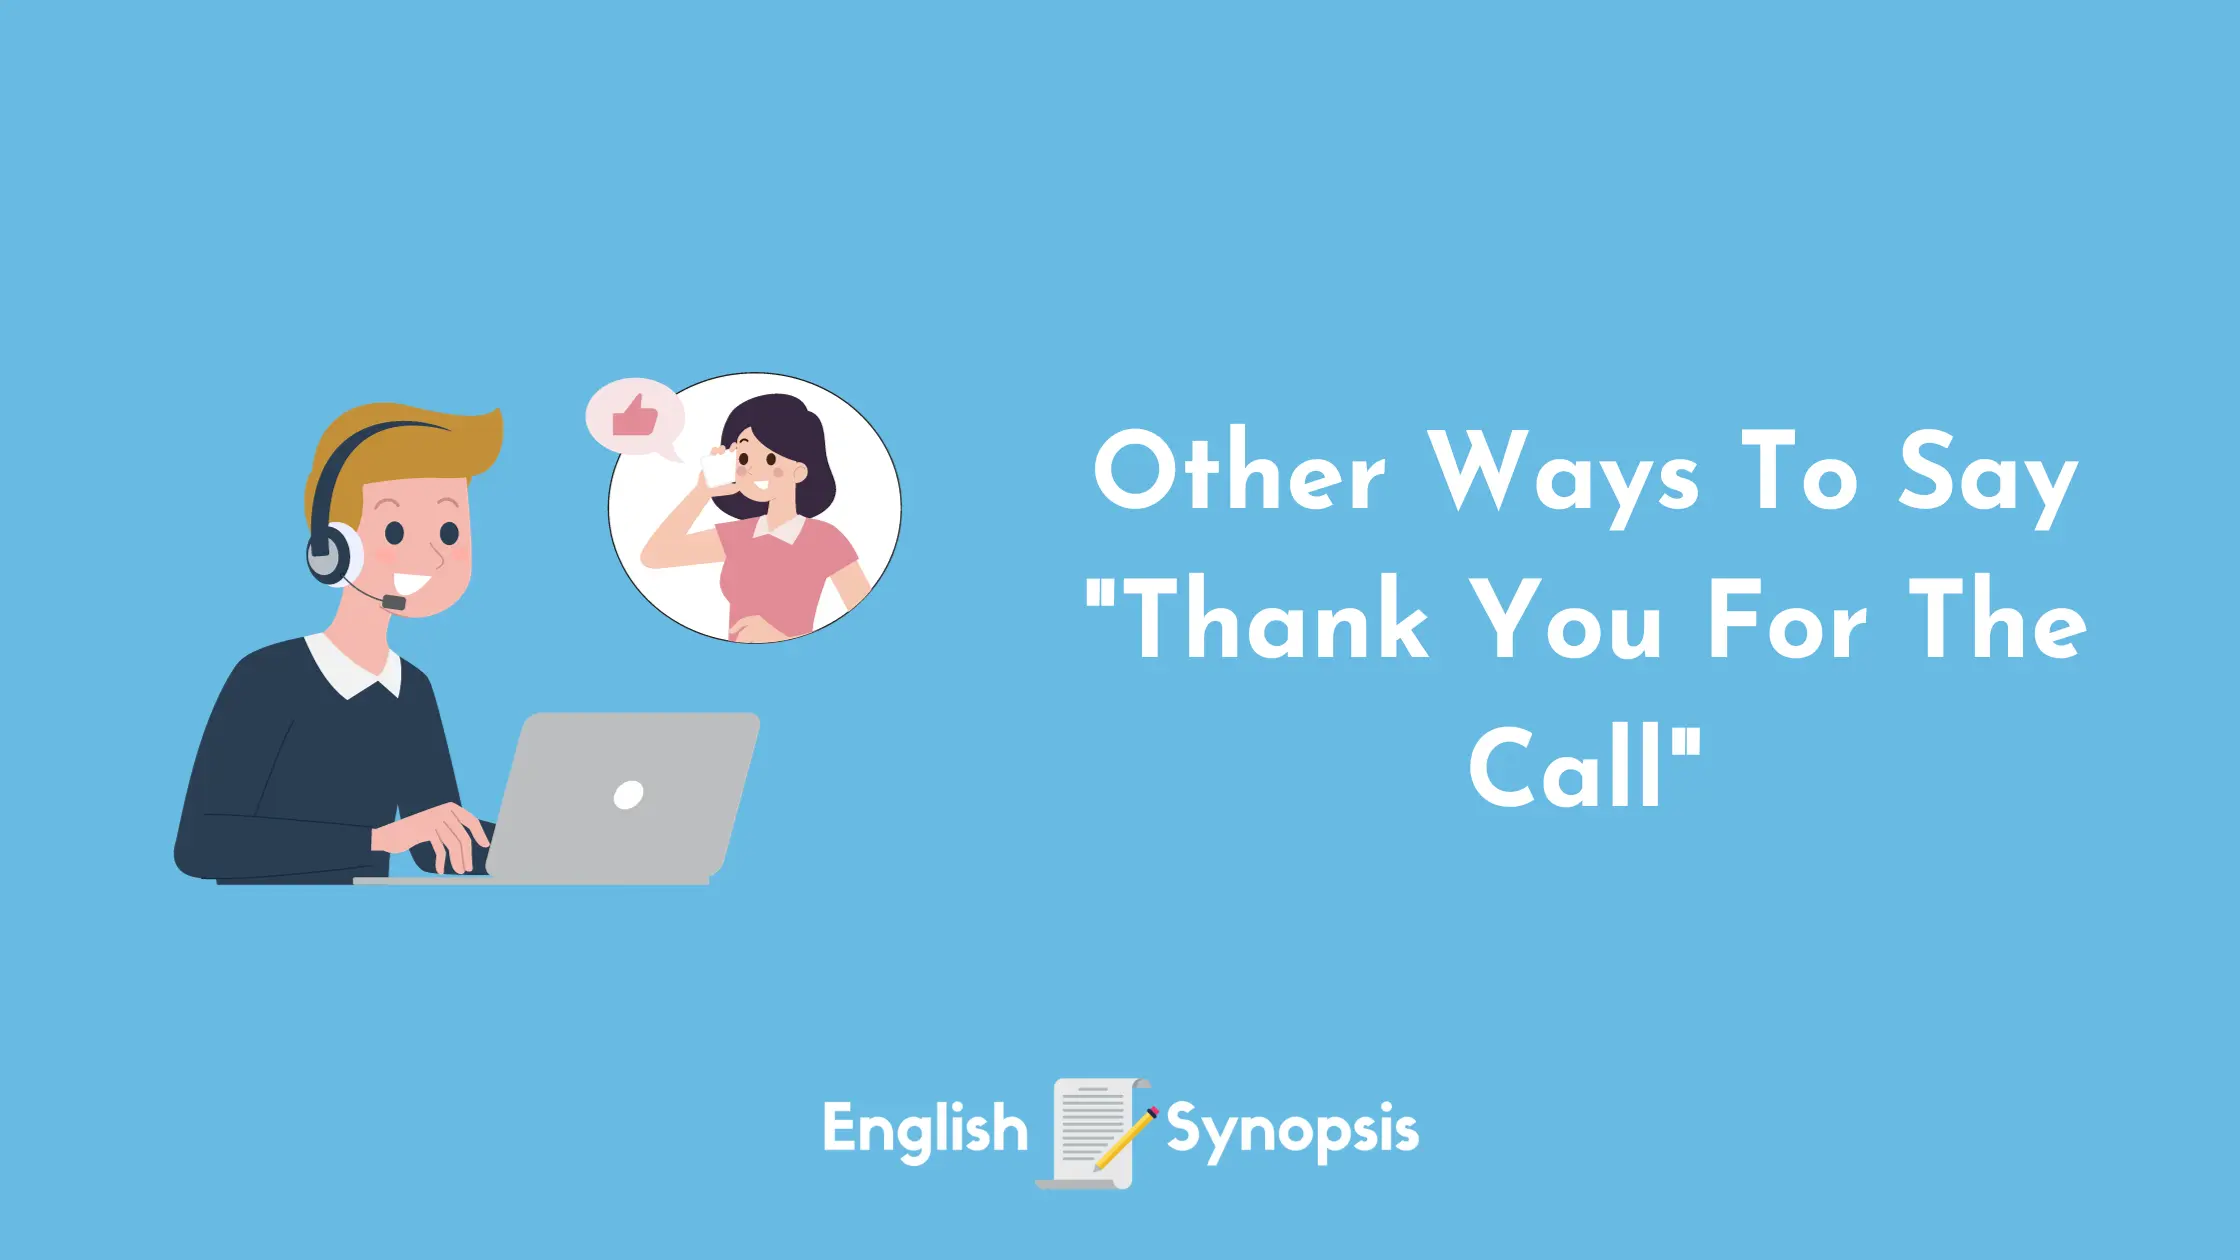 Other Ways To Say "Thank You For The Call"